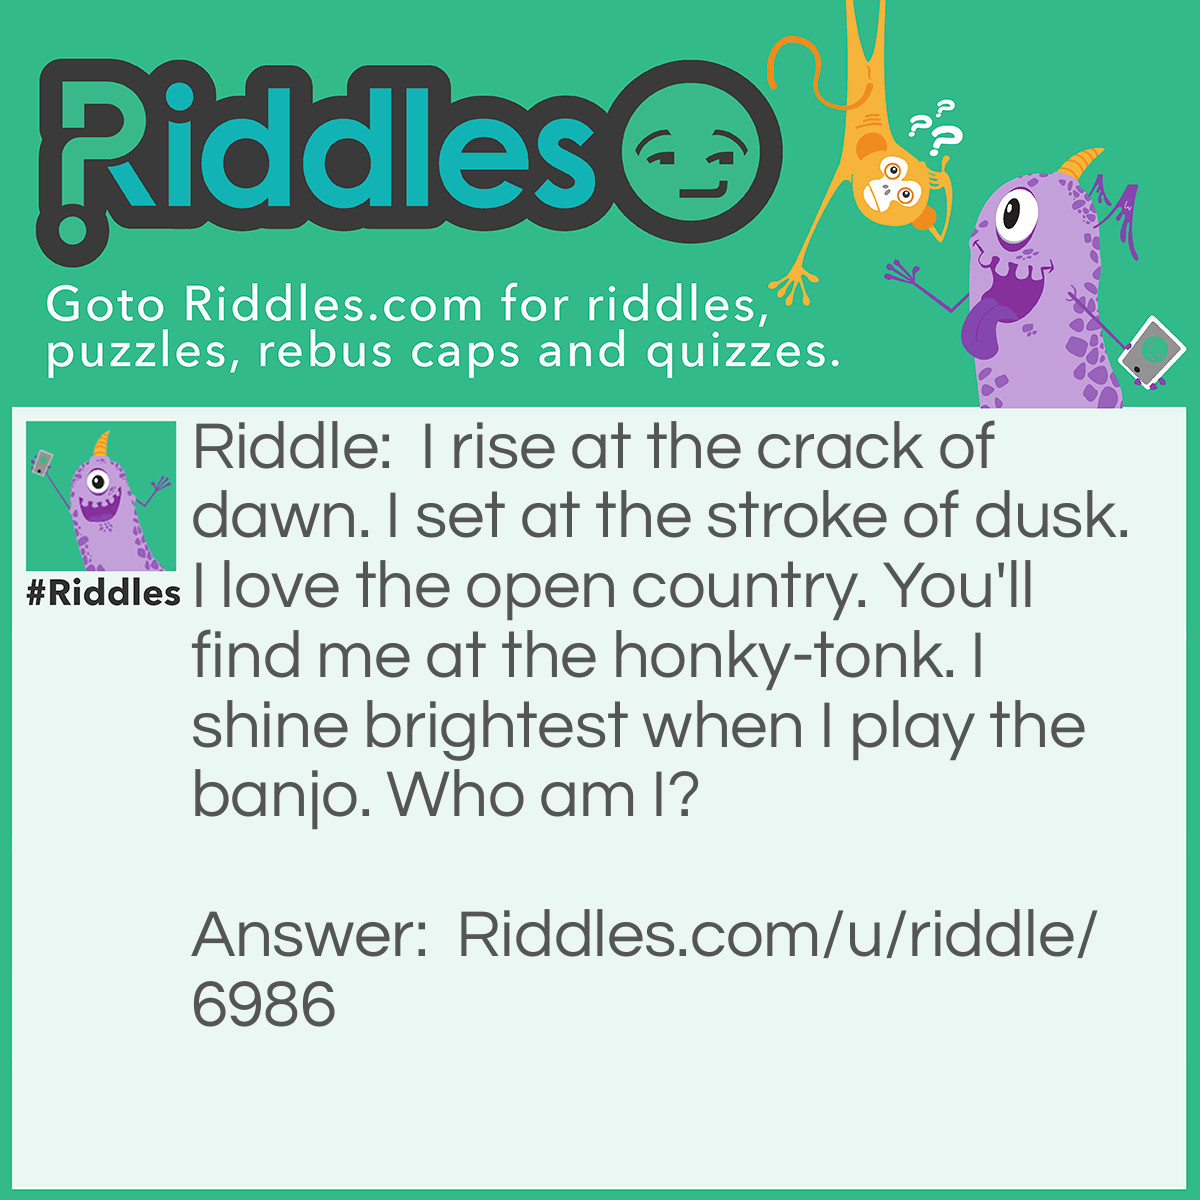 Riddle: I rise at the crack of dawn. I set at the stroke of dusk. I love the open country. You'll find me at the honky-tonk. I shine brightest when I play the banjo. Who am I? Answer: I’m a farmer/rancher/cowboy.